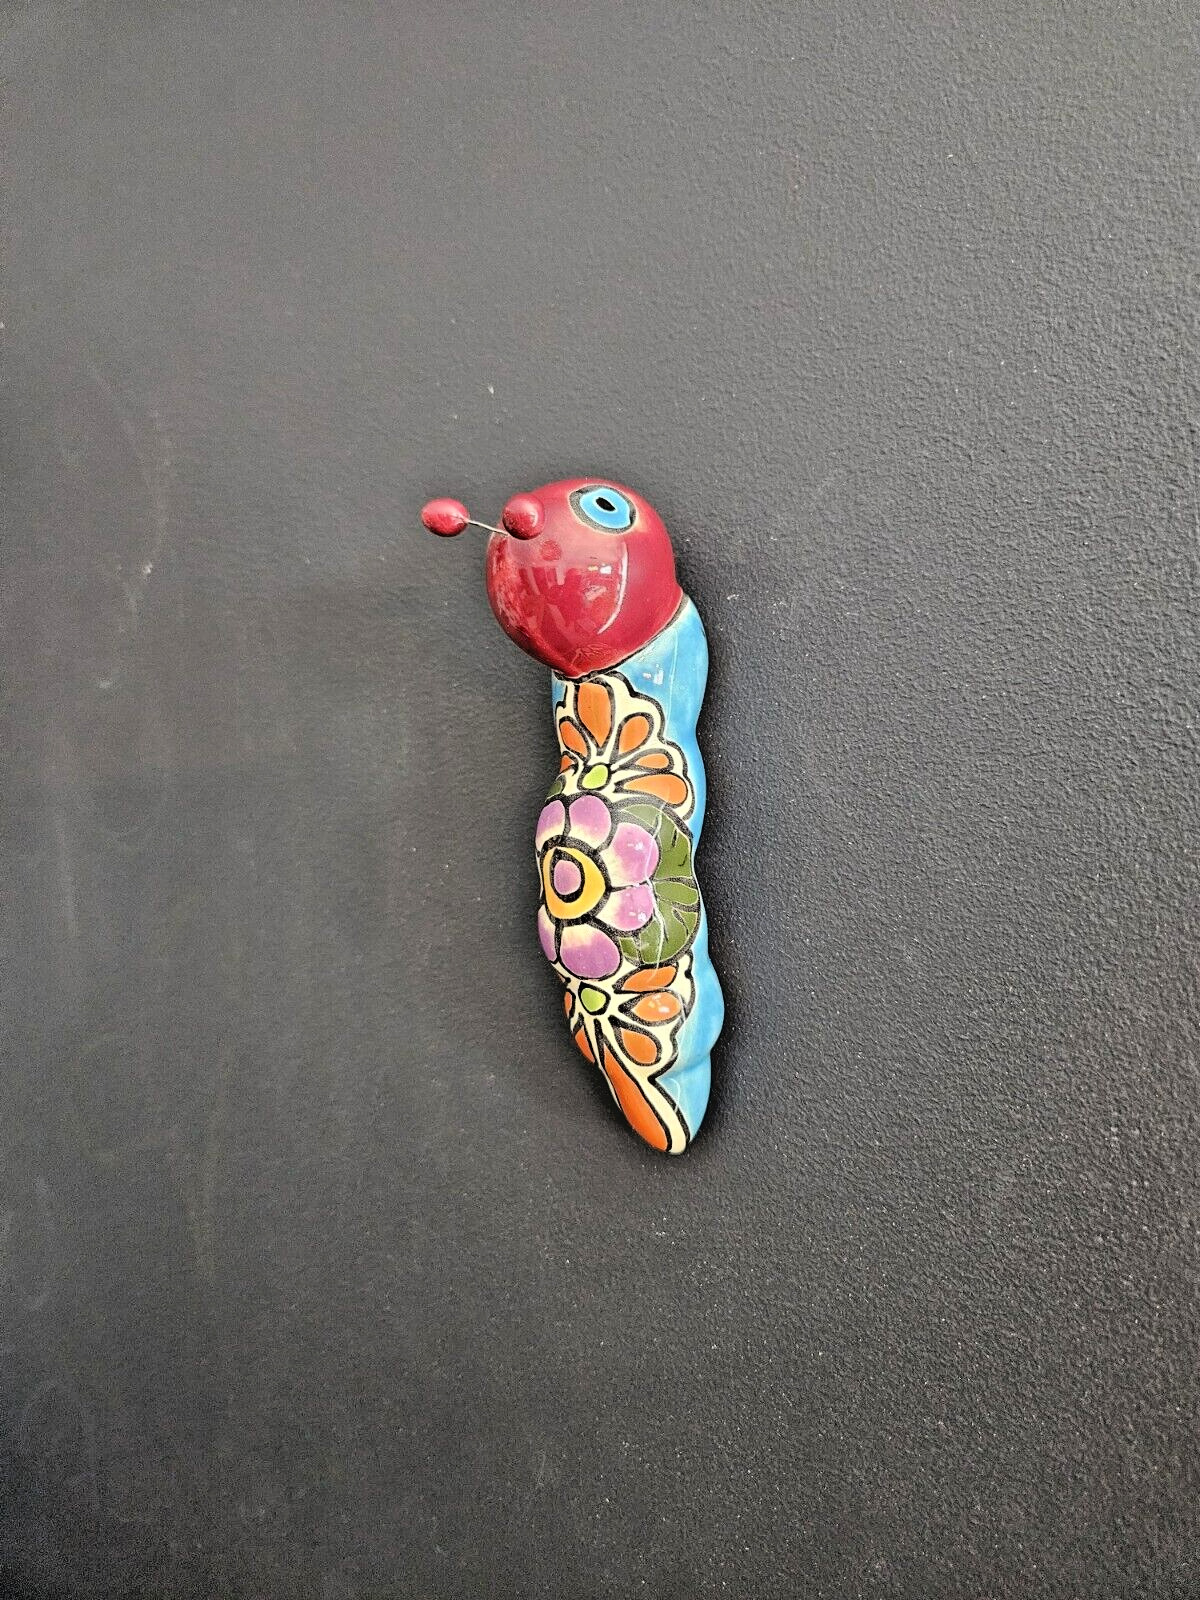 Mexican Pottery Talavera Colorful Caterpillar Wall Art Home Decor Hand Painted 